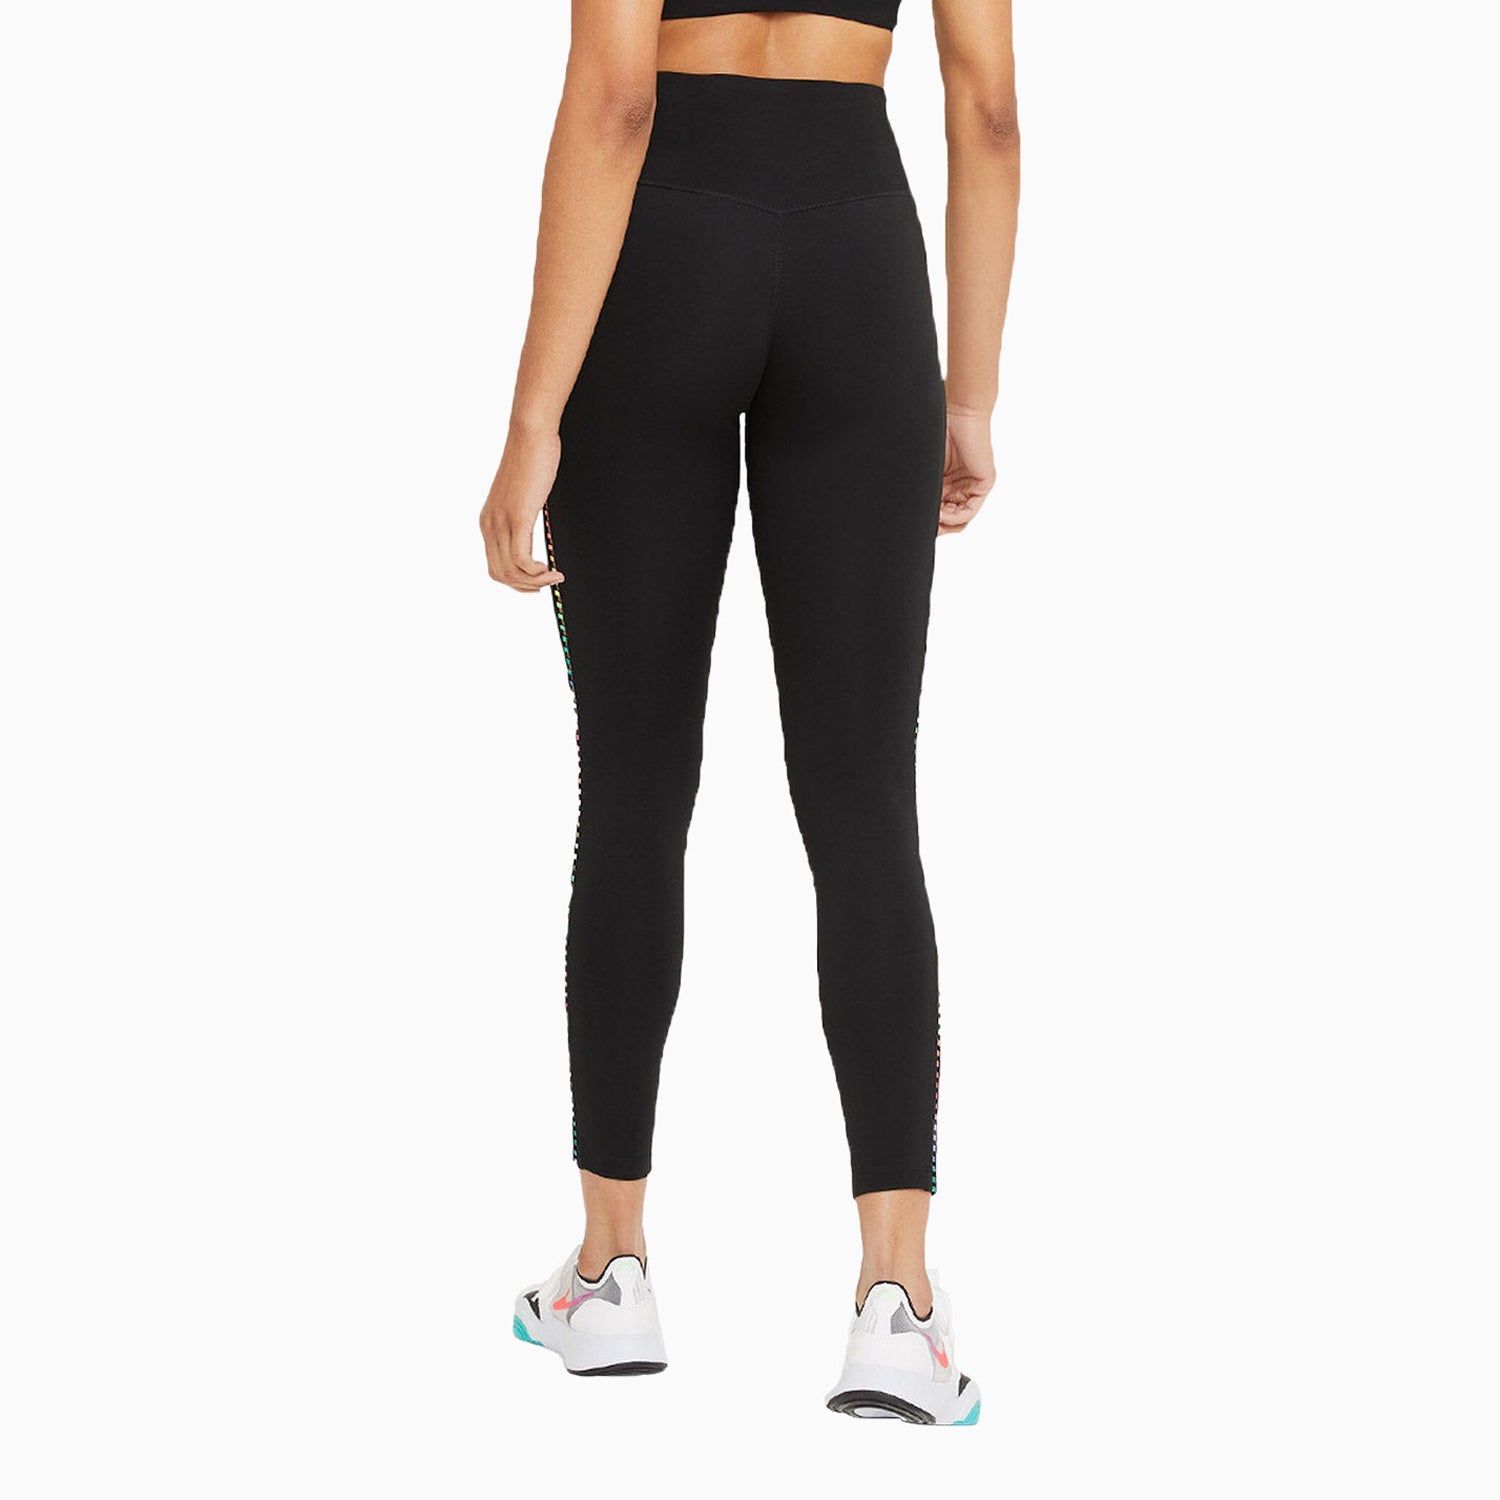 NIKE | Women's One Rainbow Ladder Leggings - Color: Black White - Tops and Bottoms USA -